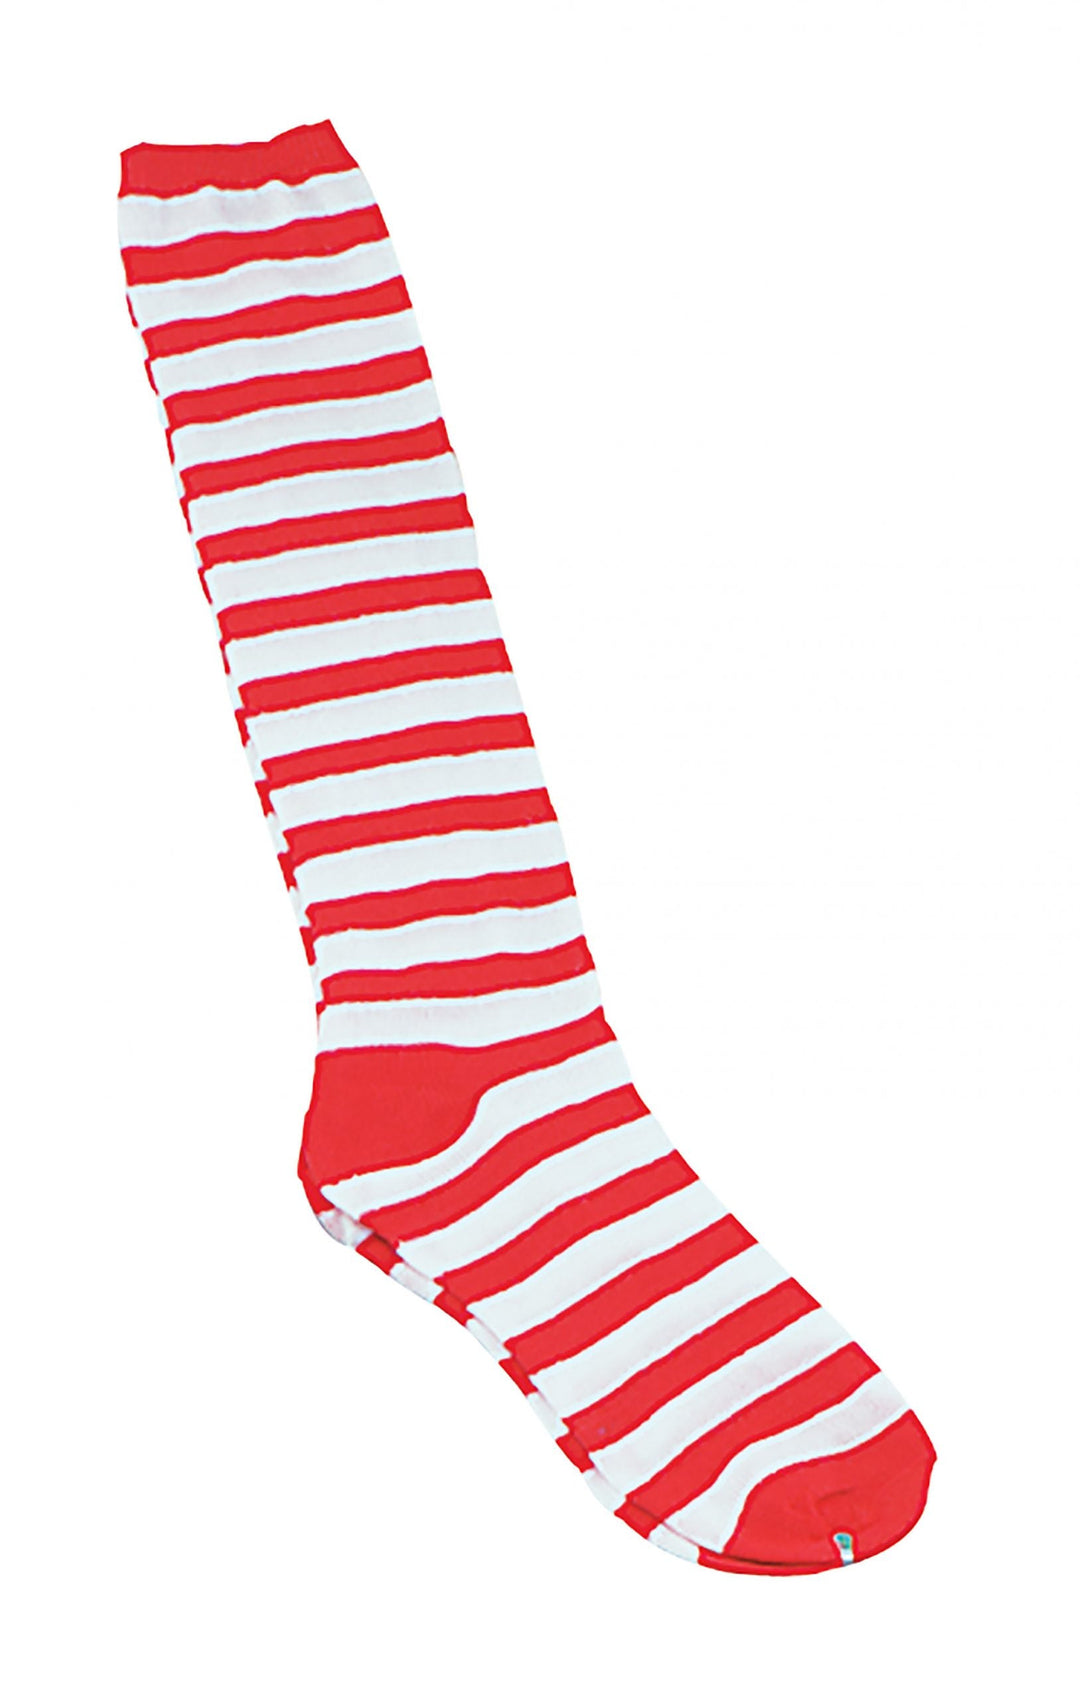 Clown Socks Red White Striped Adult Wheres Wally_1